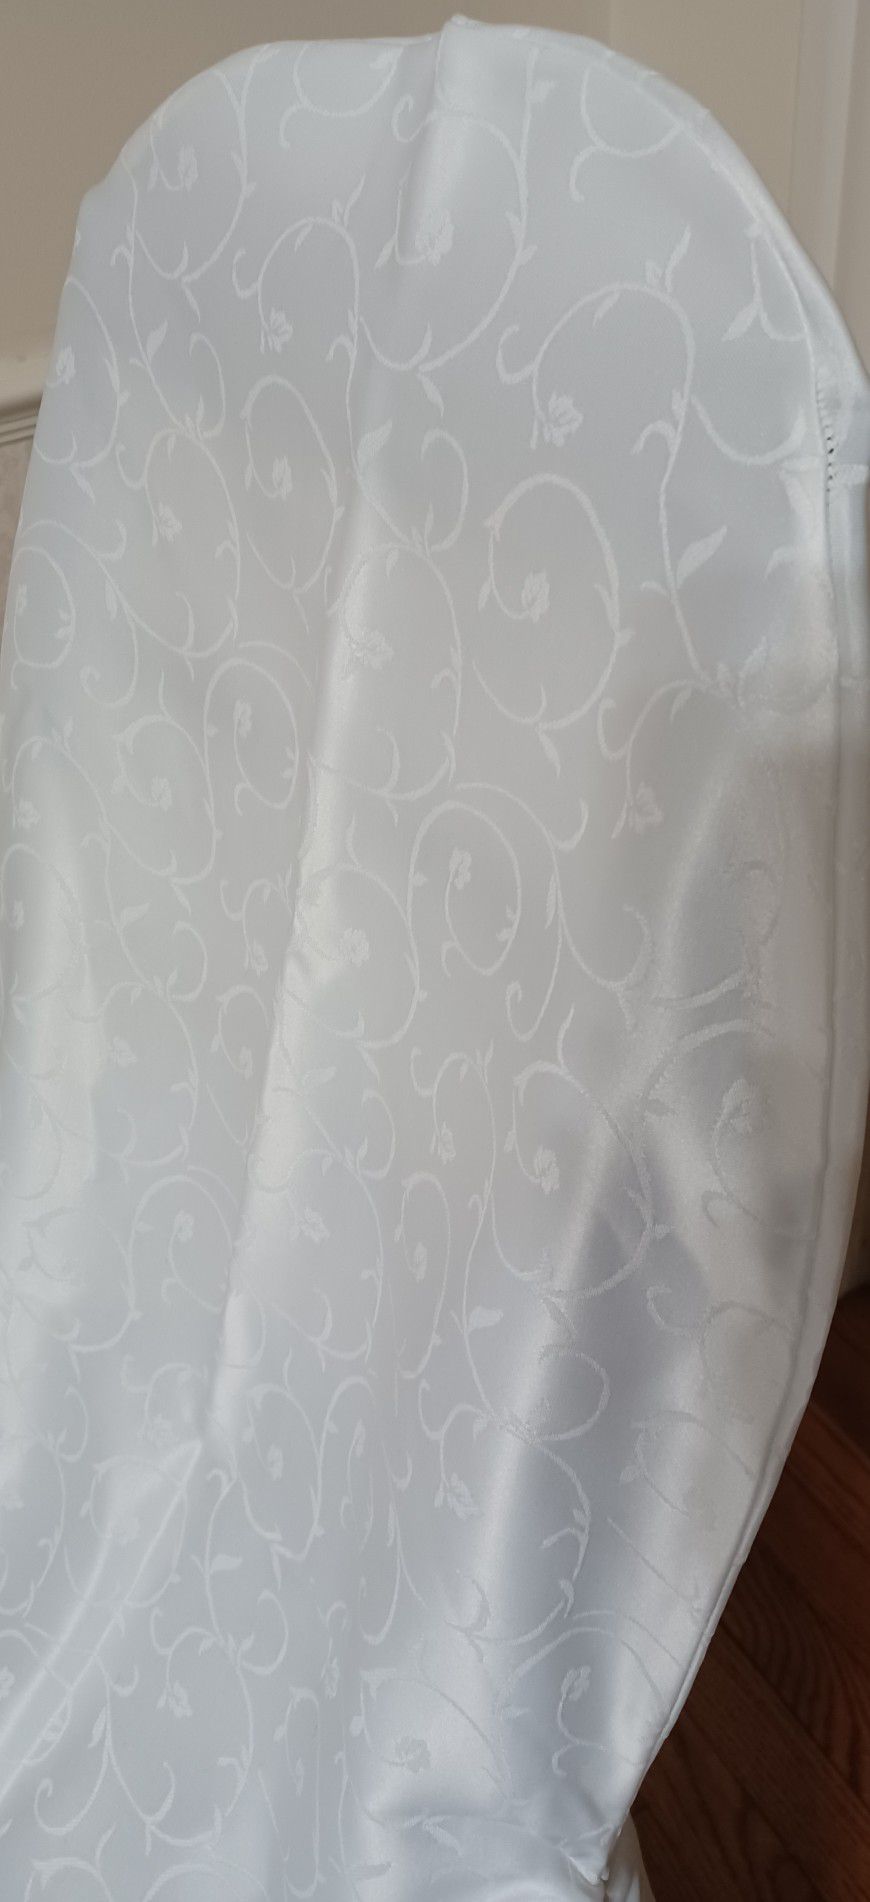 Chair Covers, White Patterned Satin , $3.50 Each, Six Total